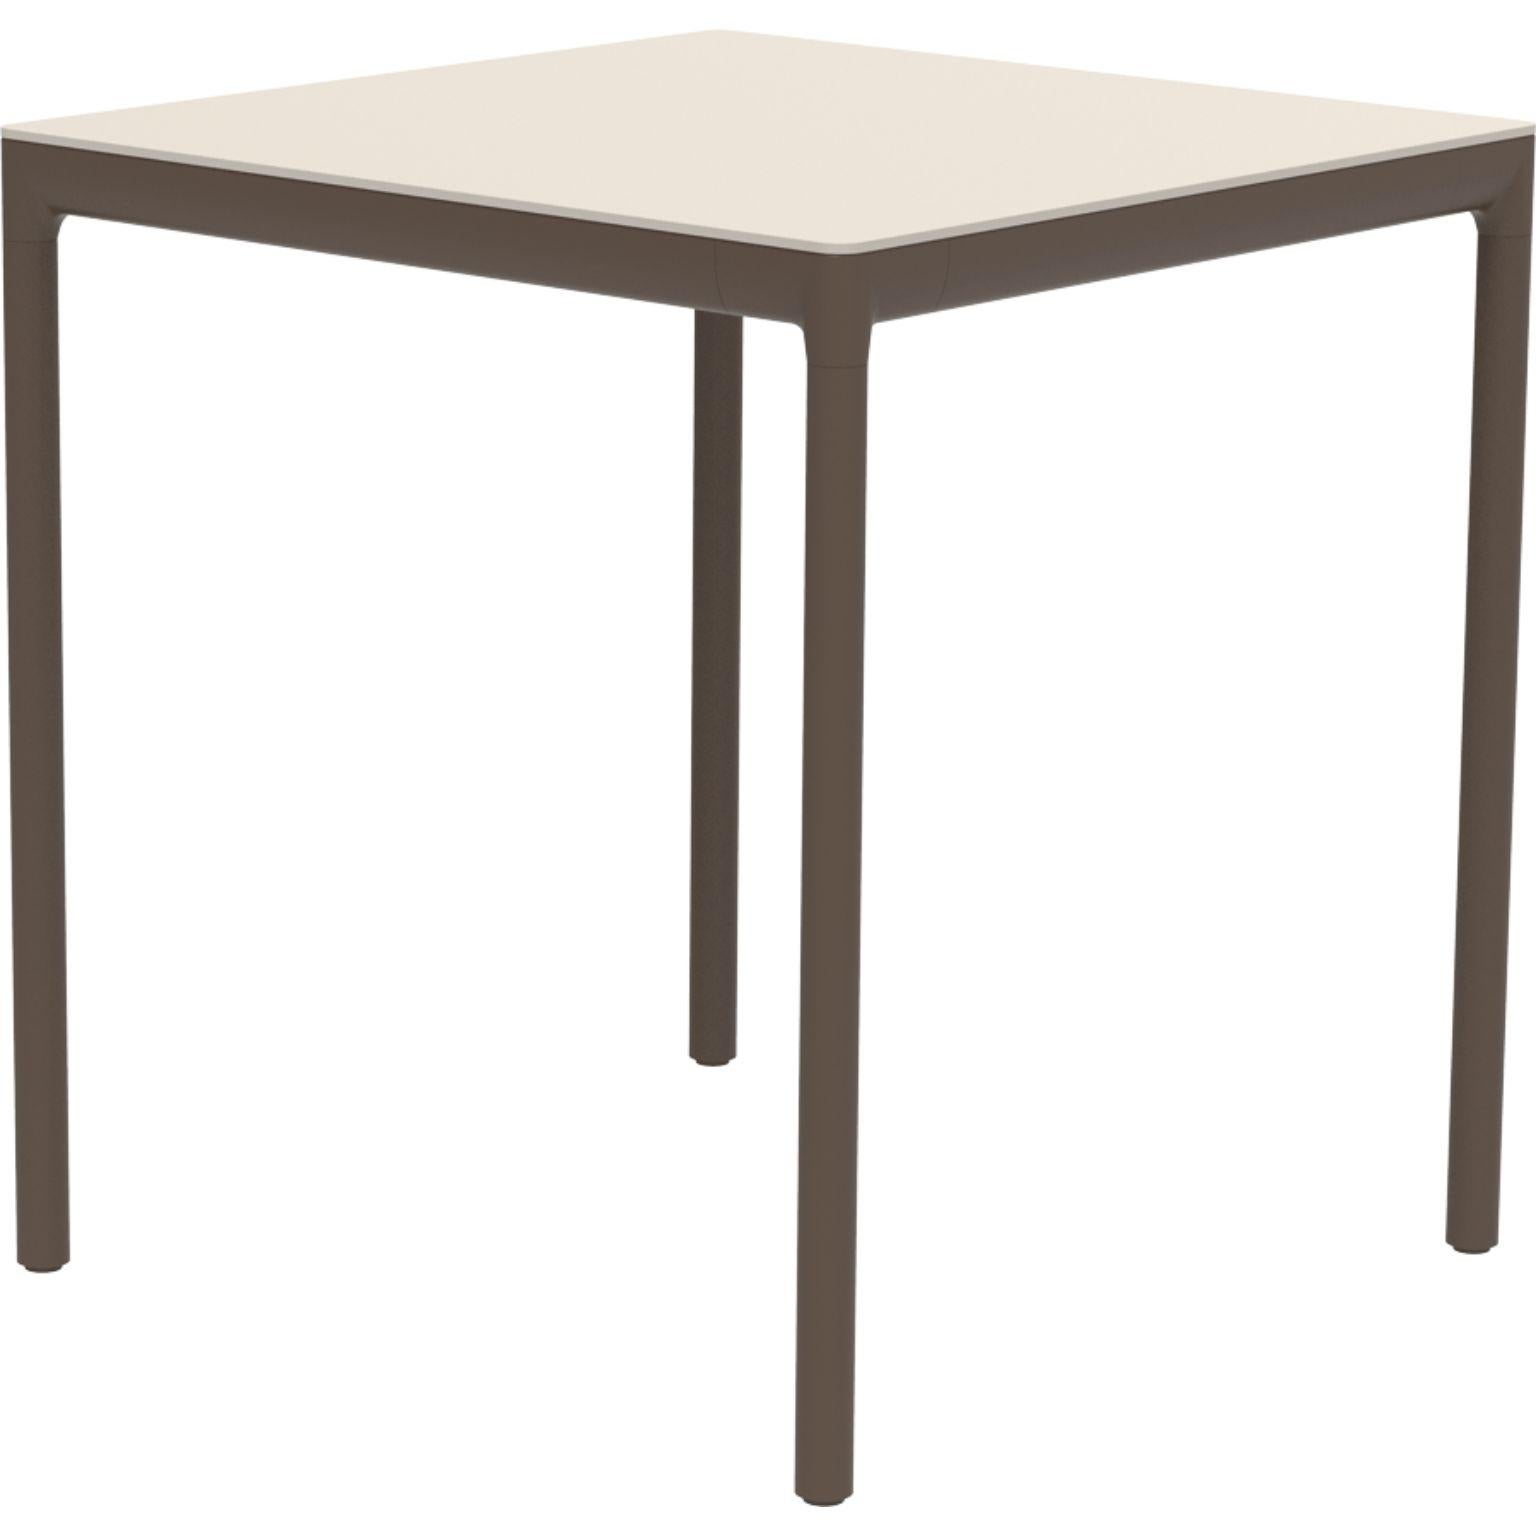 Ribbons bronze 70 side table by MOWEE
Dimensions: D70 x W70 x H75 cm.
Material: Aluminum, HPL top.
Weight: 12 kg.
Also available in different colors and finishes. (HPL Black Edge or Neolith top).

An unmistakable collection for its beauty and